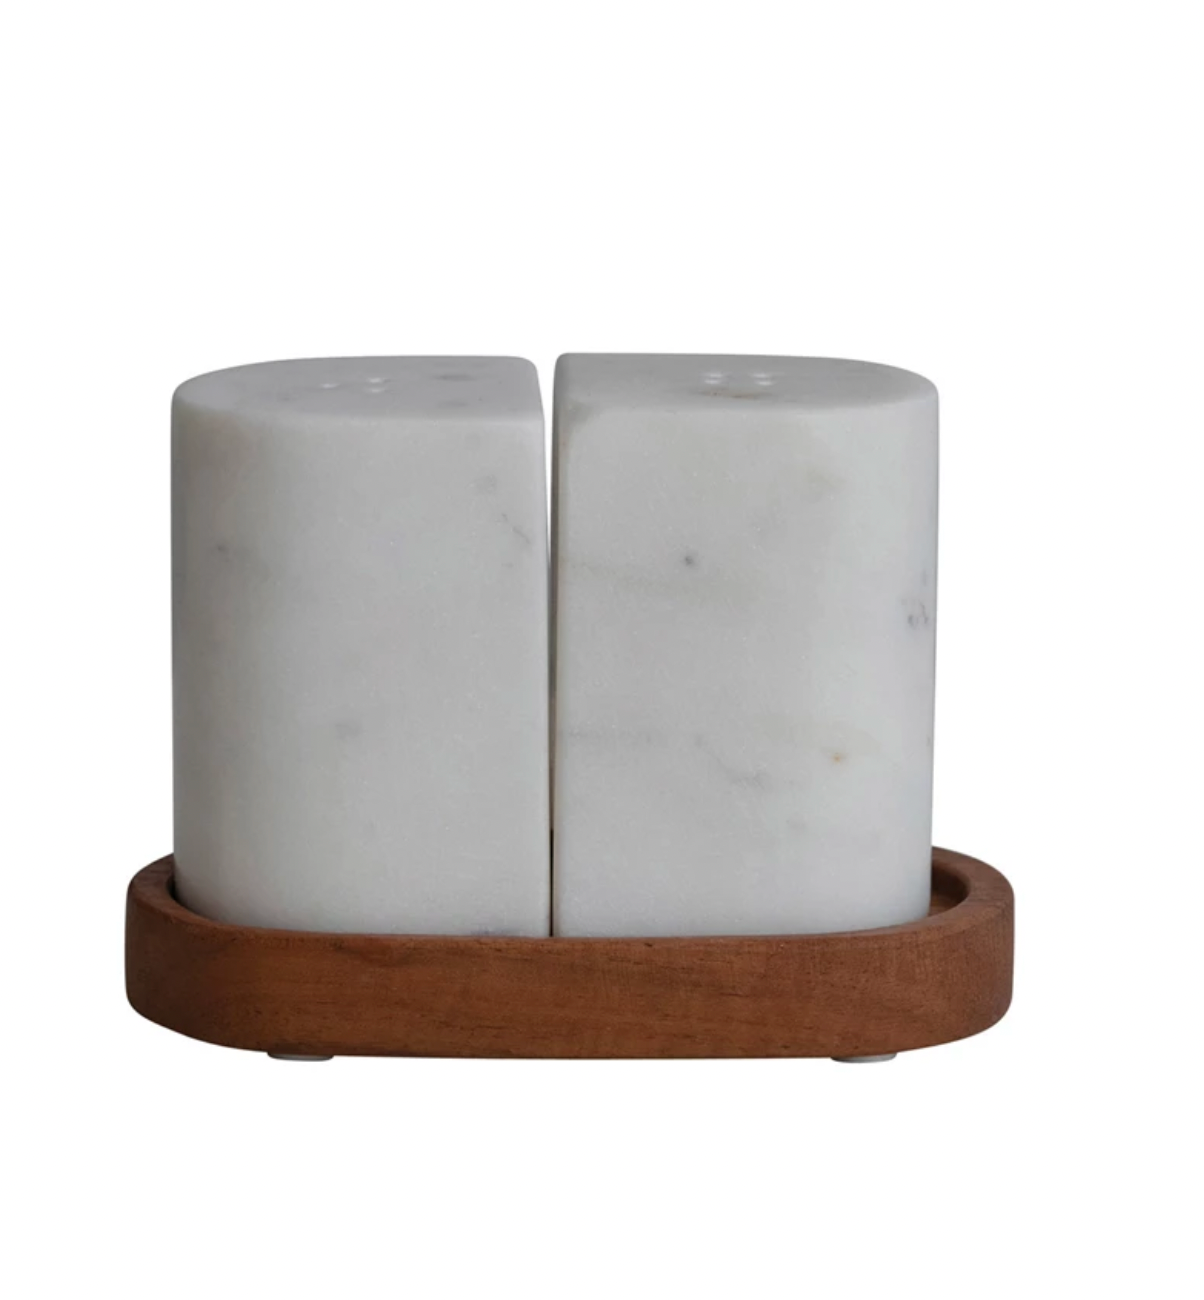 Marble Salt & Pepper Shakers on Tray